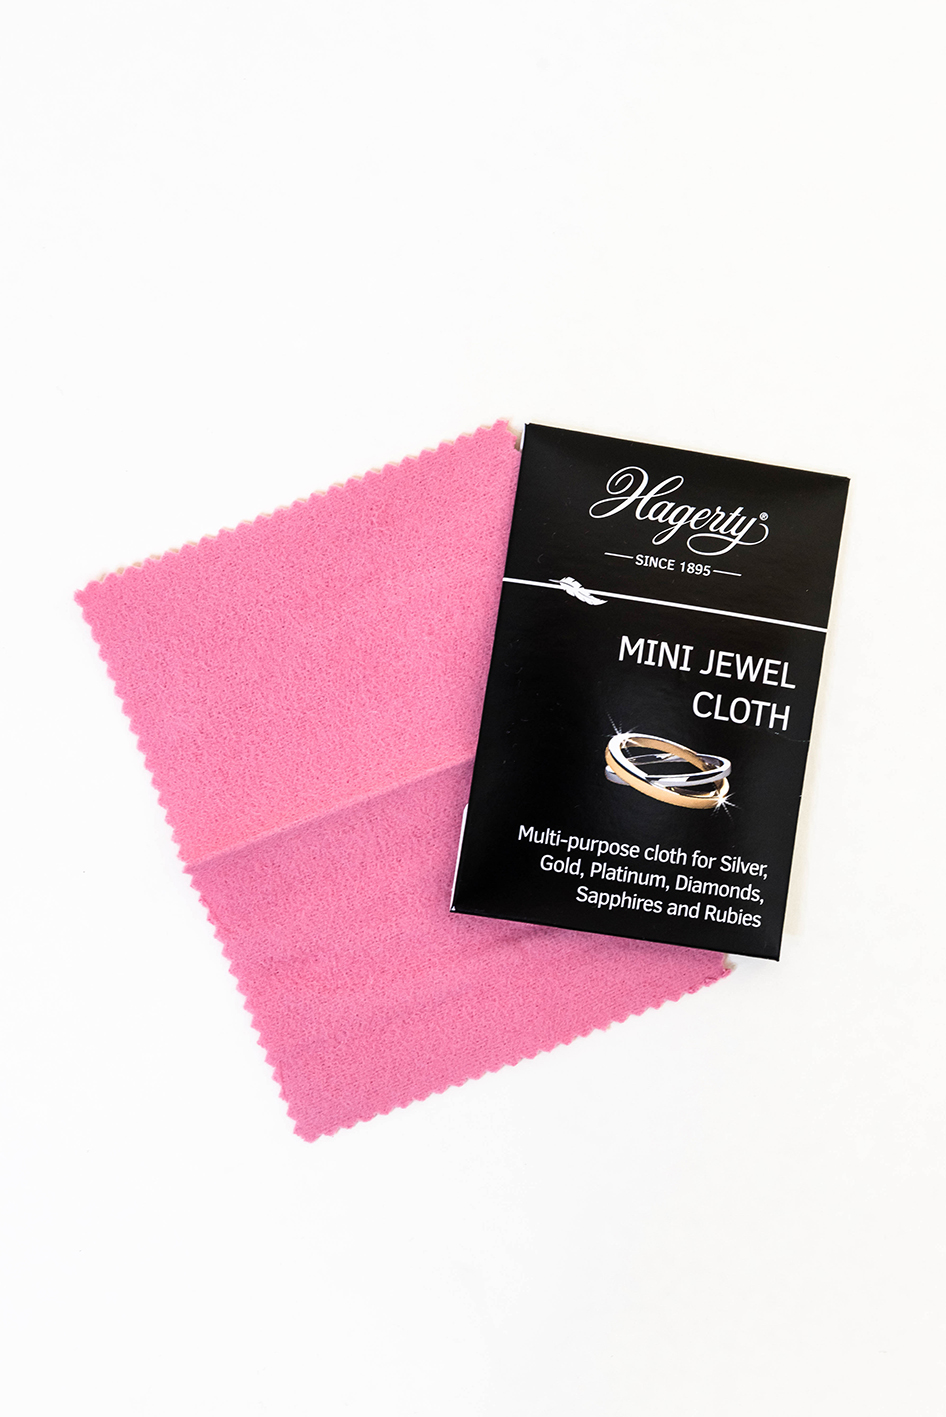 Jewelry cleaning cloth for silver, gold, diamonds and gemstones